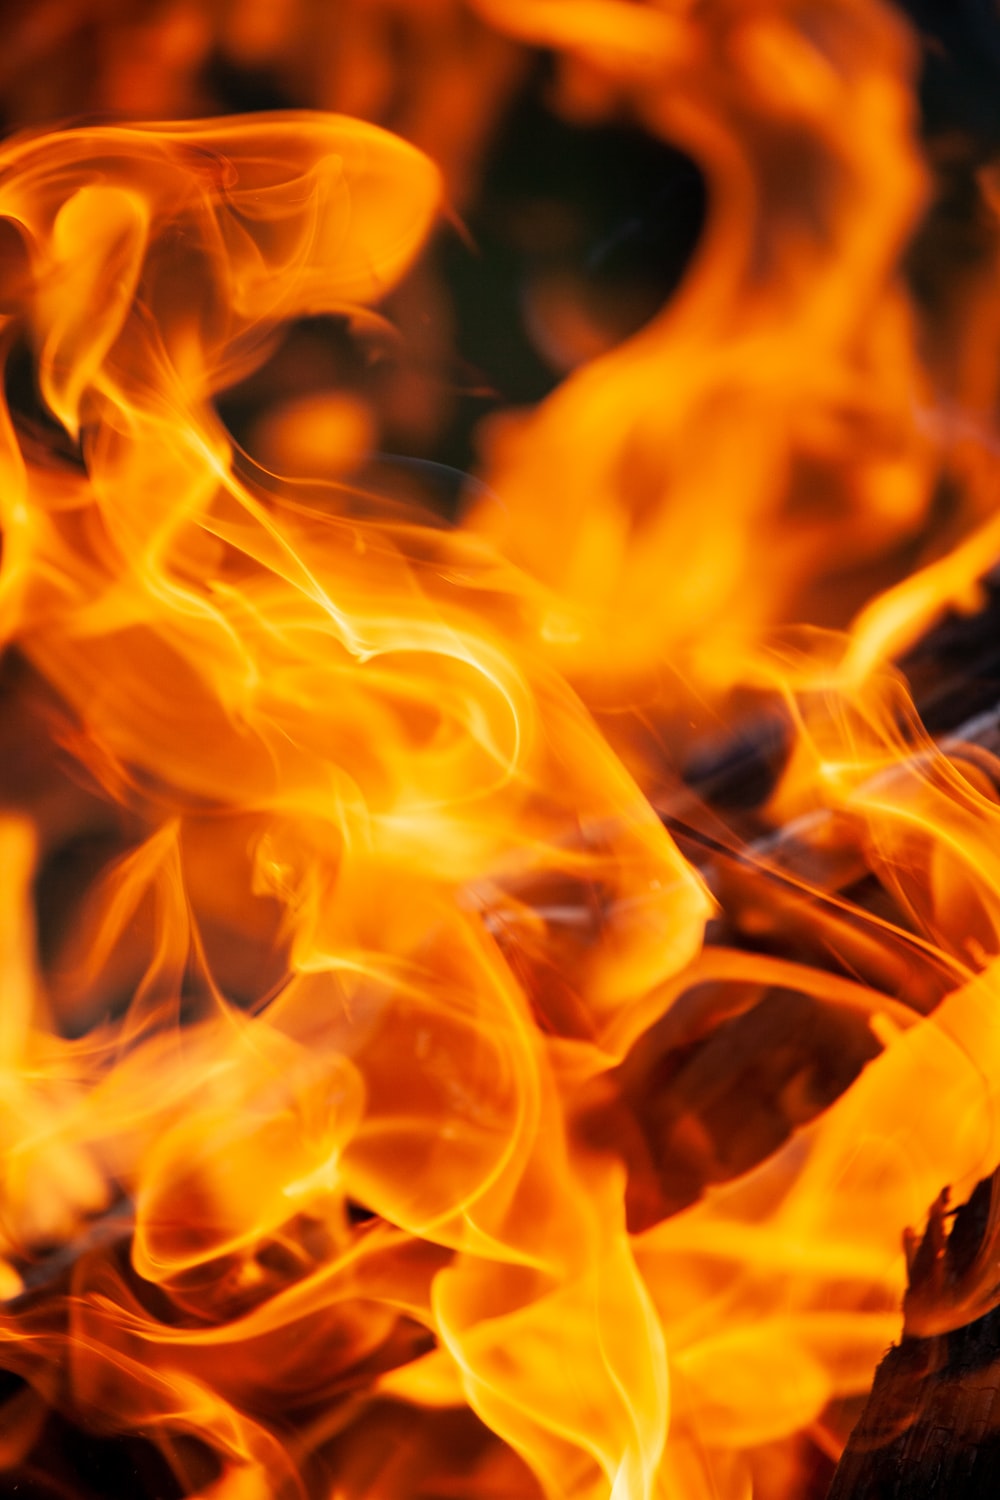 Burning Fire Picture. Download Free Image